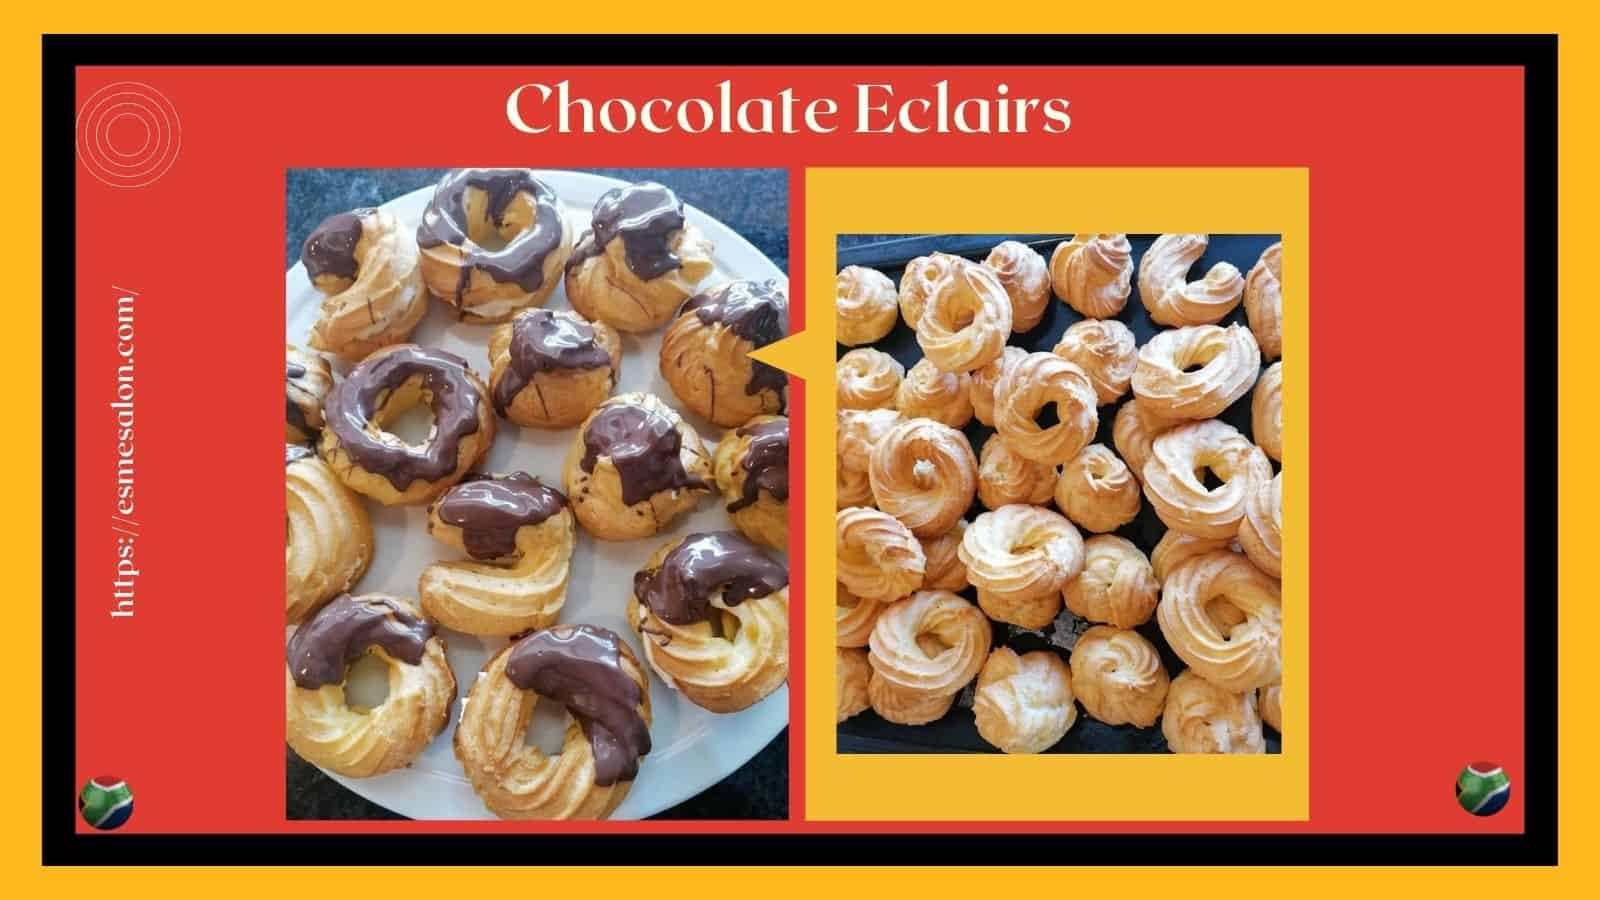 An image of a white plate filled with Chocolate Eclairs